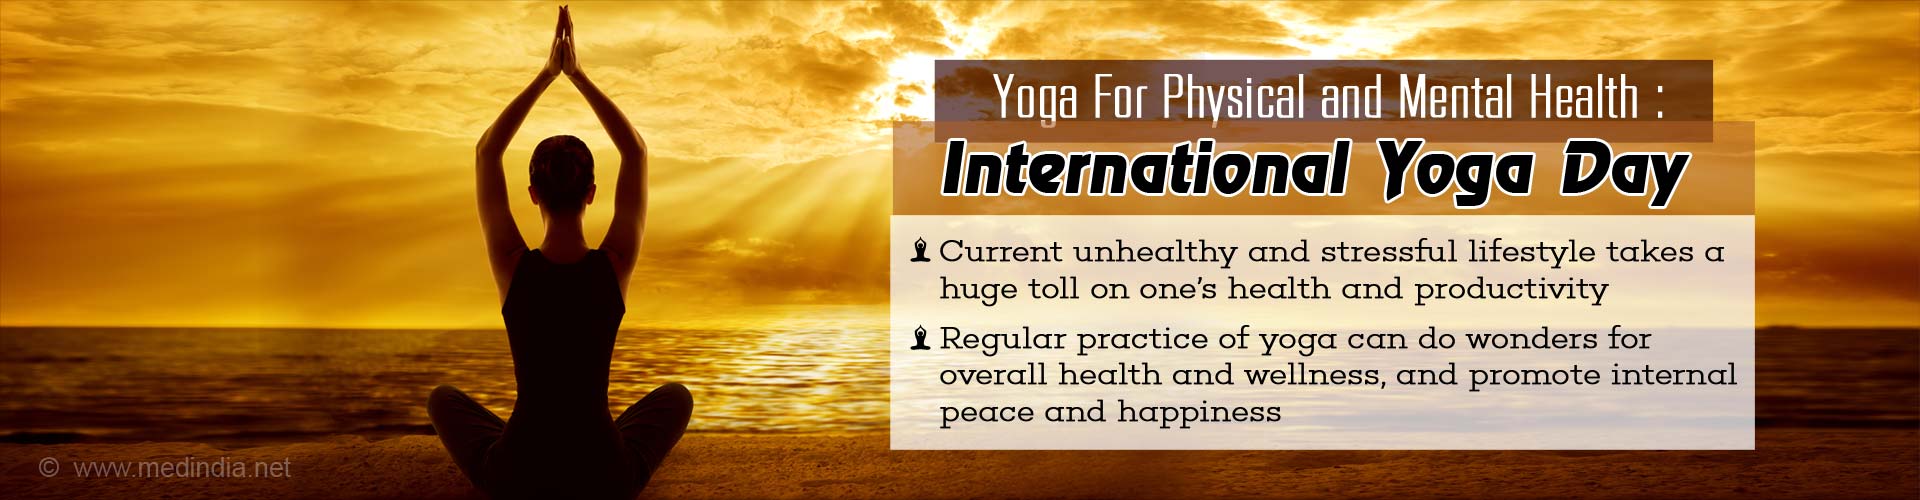 Yoga for Physical And Mental Health: International Yoga Day
- Current unhealthy and stressful lifestyle takes a huge toll on one's health and productivity
- Regular practice of yoga can do wonders for overall health and wellness, and promote internal peace and happiness